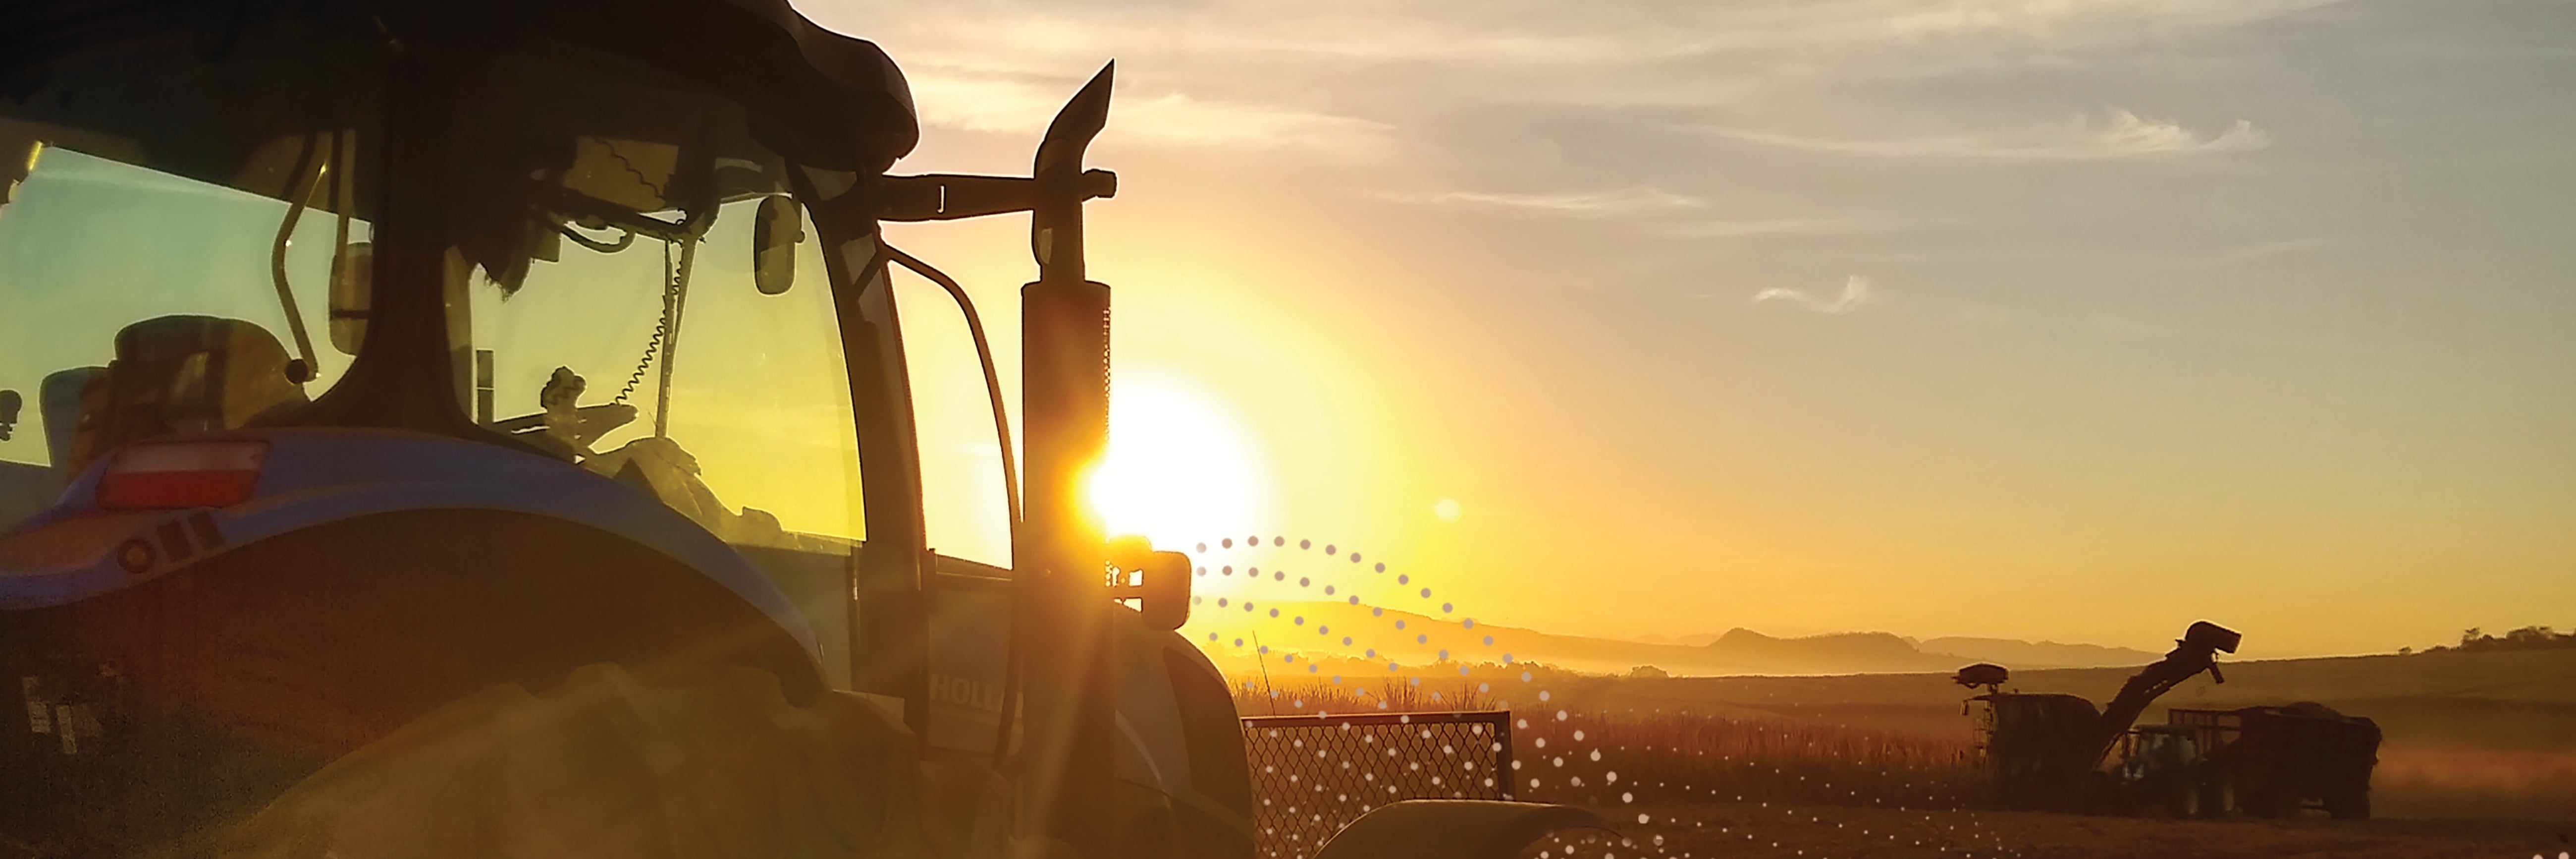 Farm equipment in field at sunset